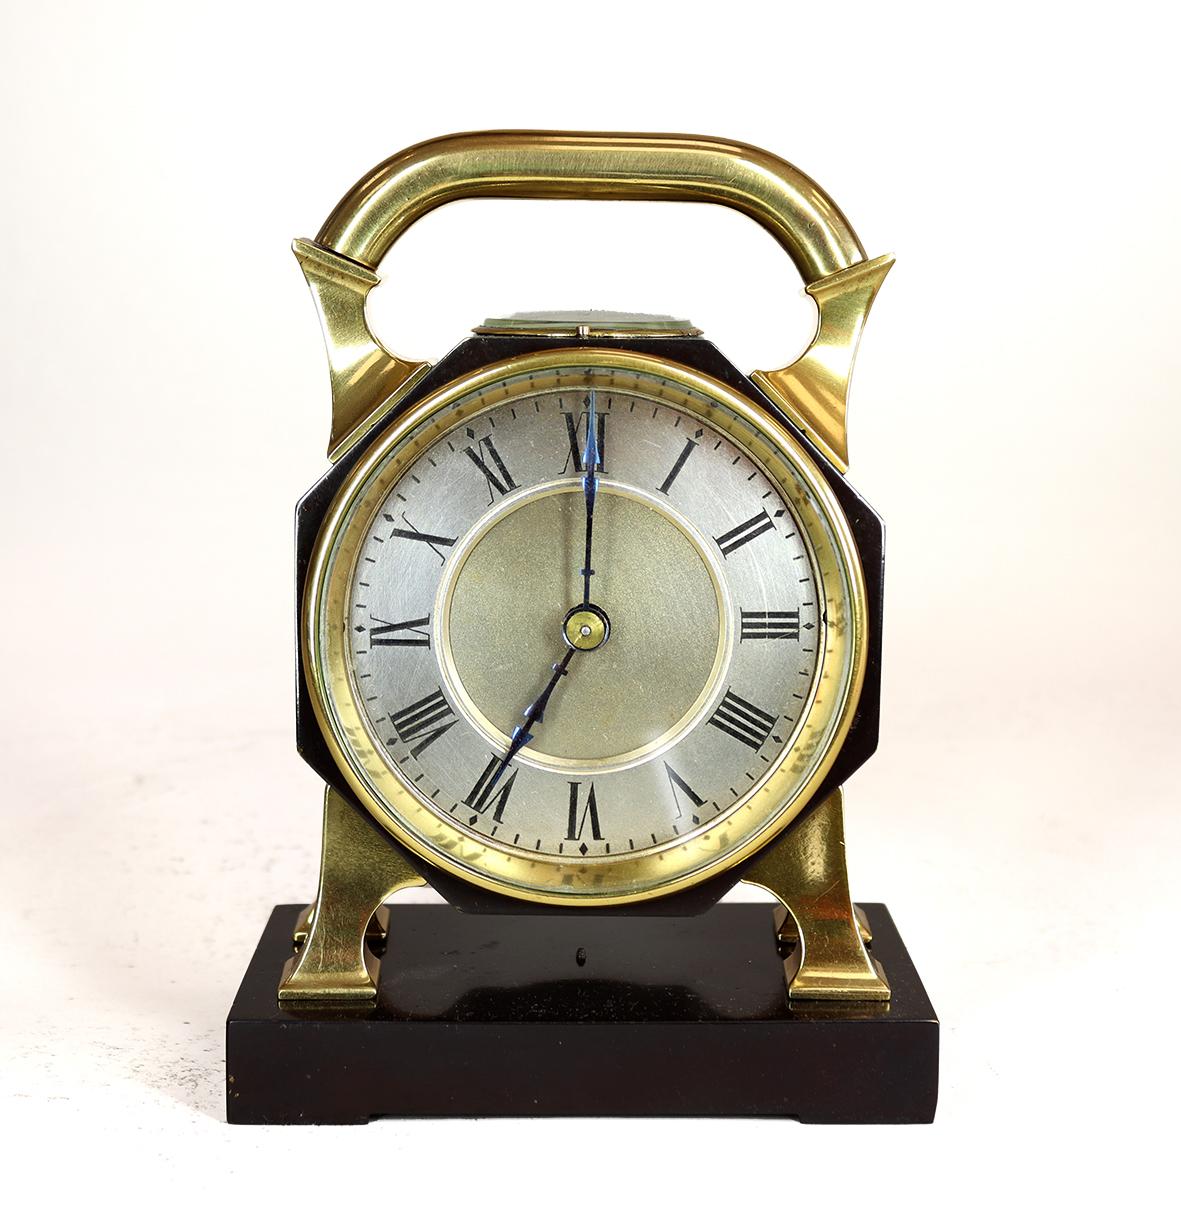 A very stylish late nineteenth century desk clock with integrated compass, reminiscent of the Industrial series of clocks by Andre Guilmet. The eight day movement governed by a cylinder escapement, behind a two tone roman dial with matted central